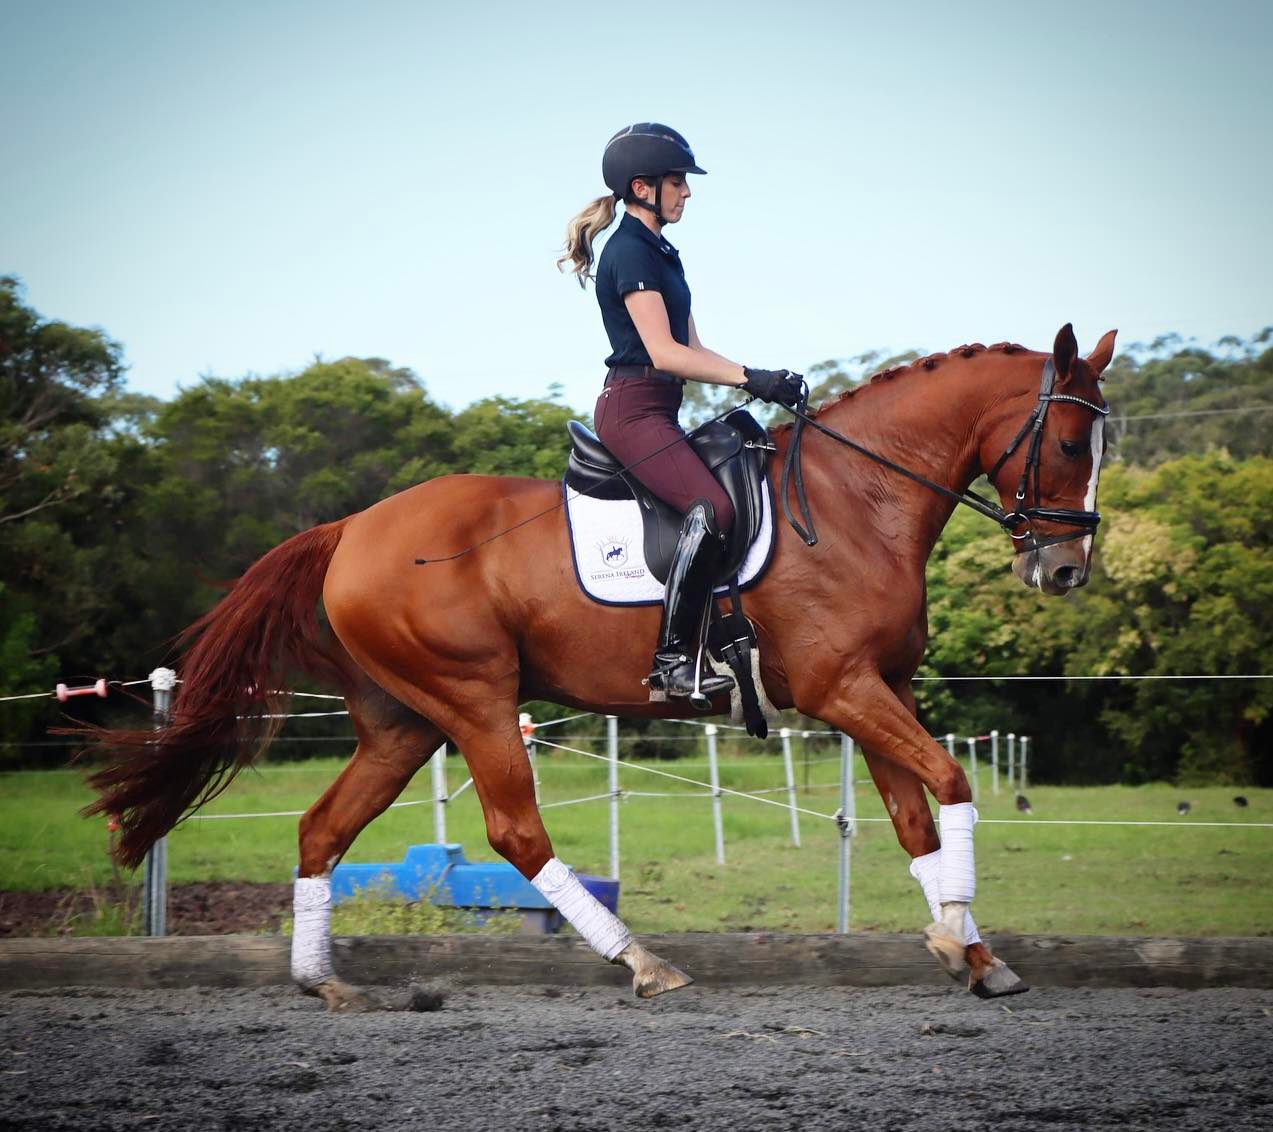 SOLD!! - Serena Ireland Dressage presents for sale | Every parent's dream horse